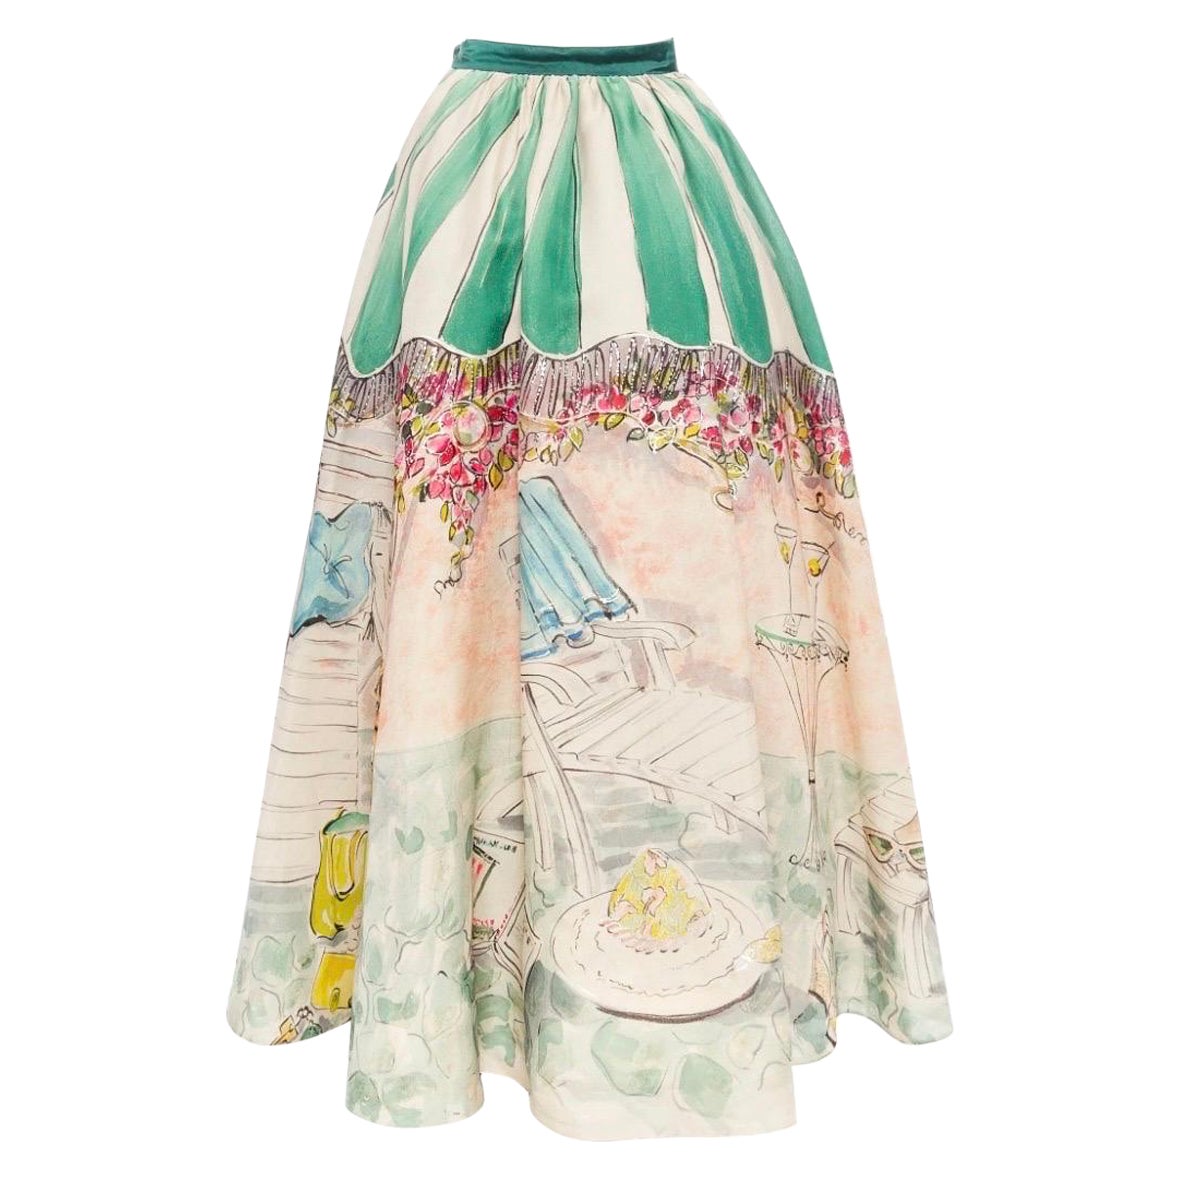 Perry Ellis 1992 Hand-Painted Cotton Organdy Full Skirt (Marc Jacobs) For Sale